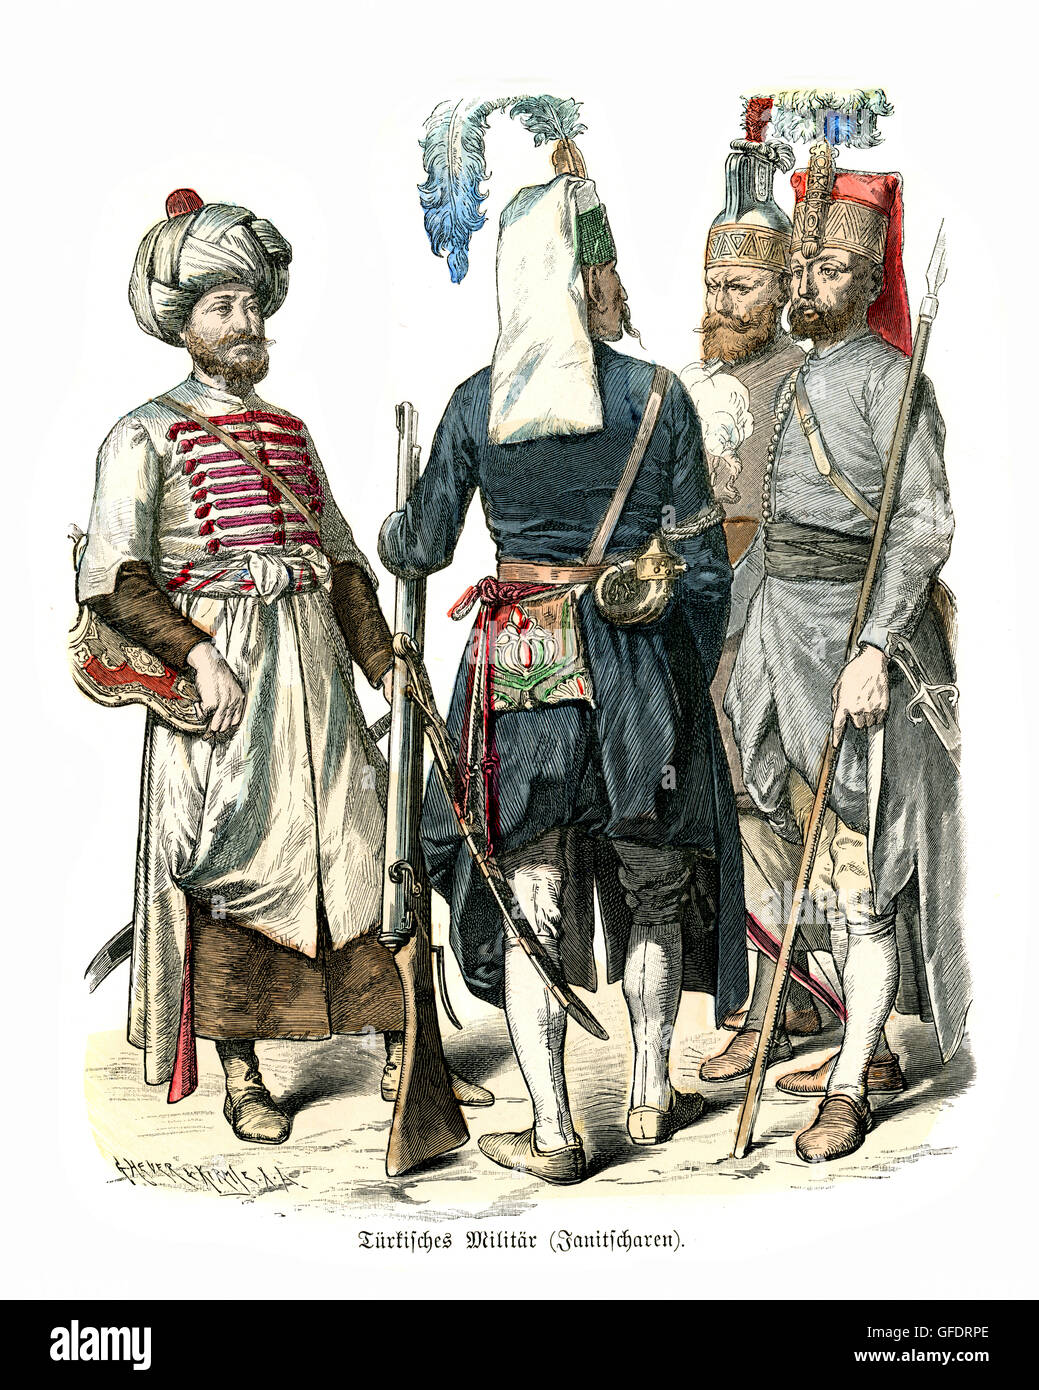 Military uniforms of Ottoman Turkey 17th and 18th Century. Janissaries elite infantry units that formed the Ottoman Sultan's hou Stock Photo